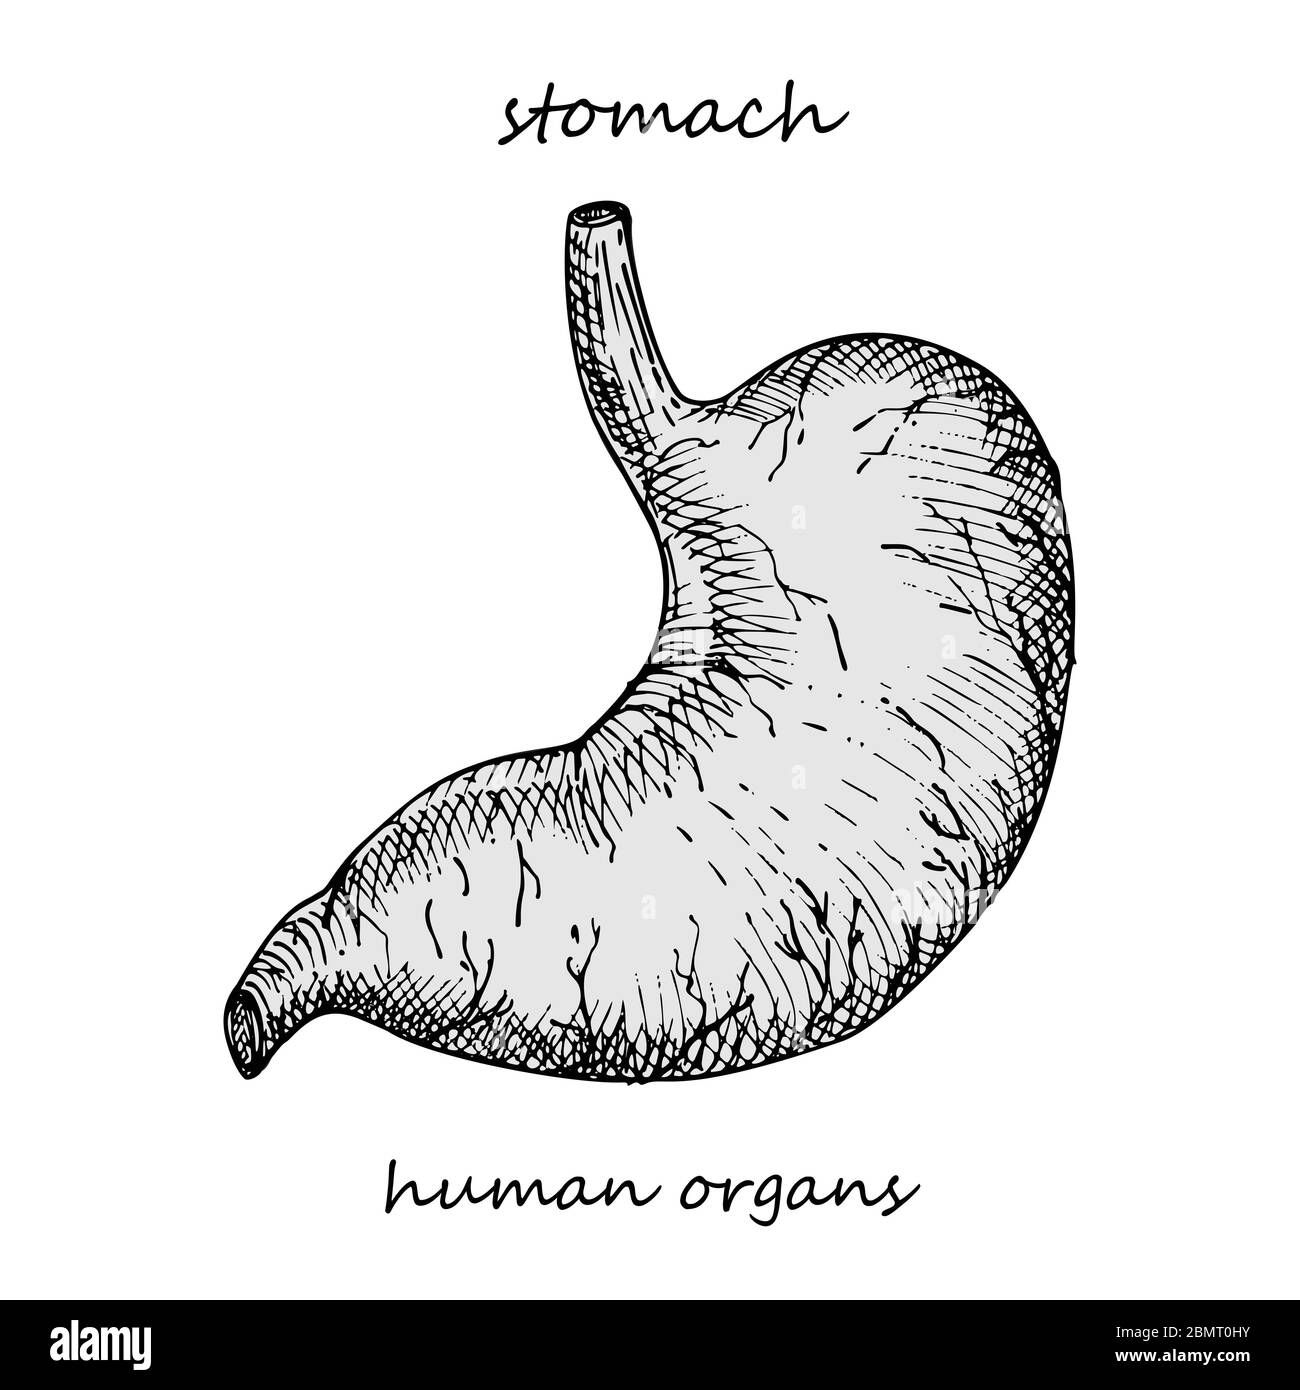 Stomach Drawing Images  Free Download on Freepik